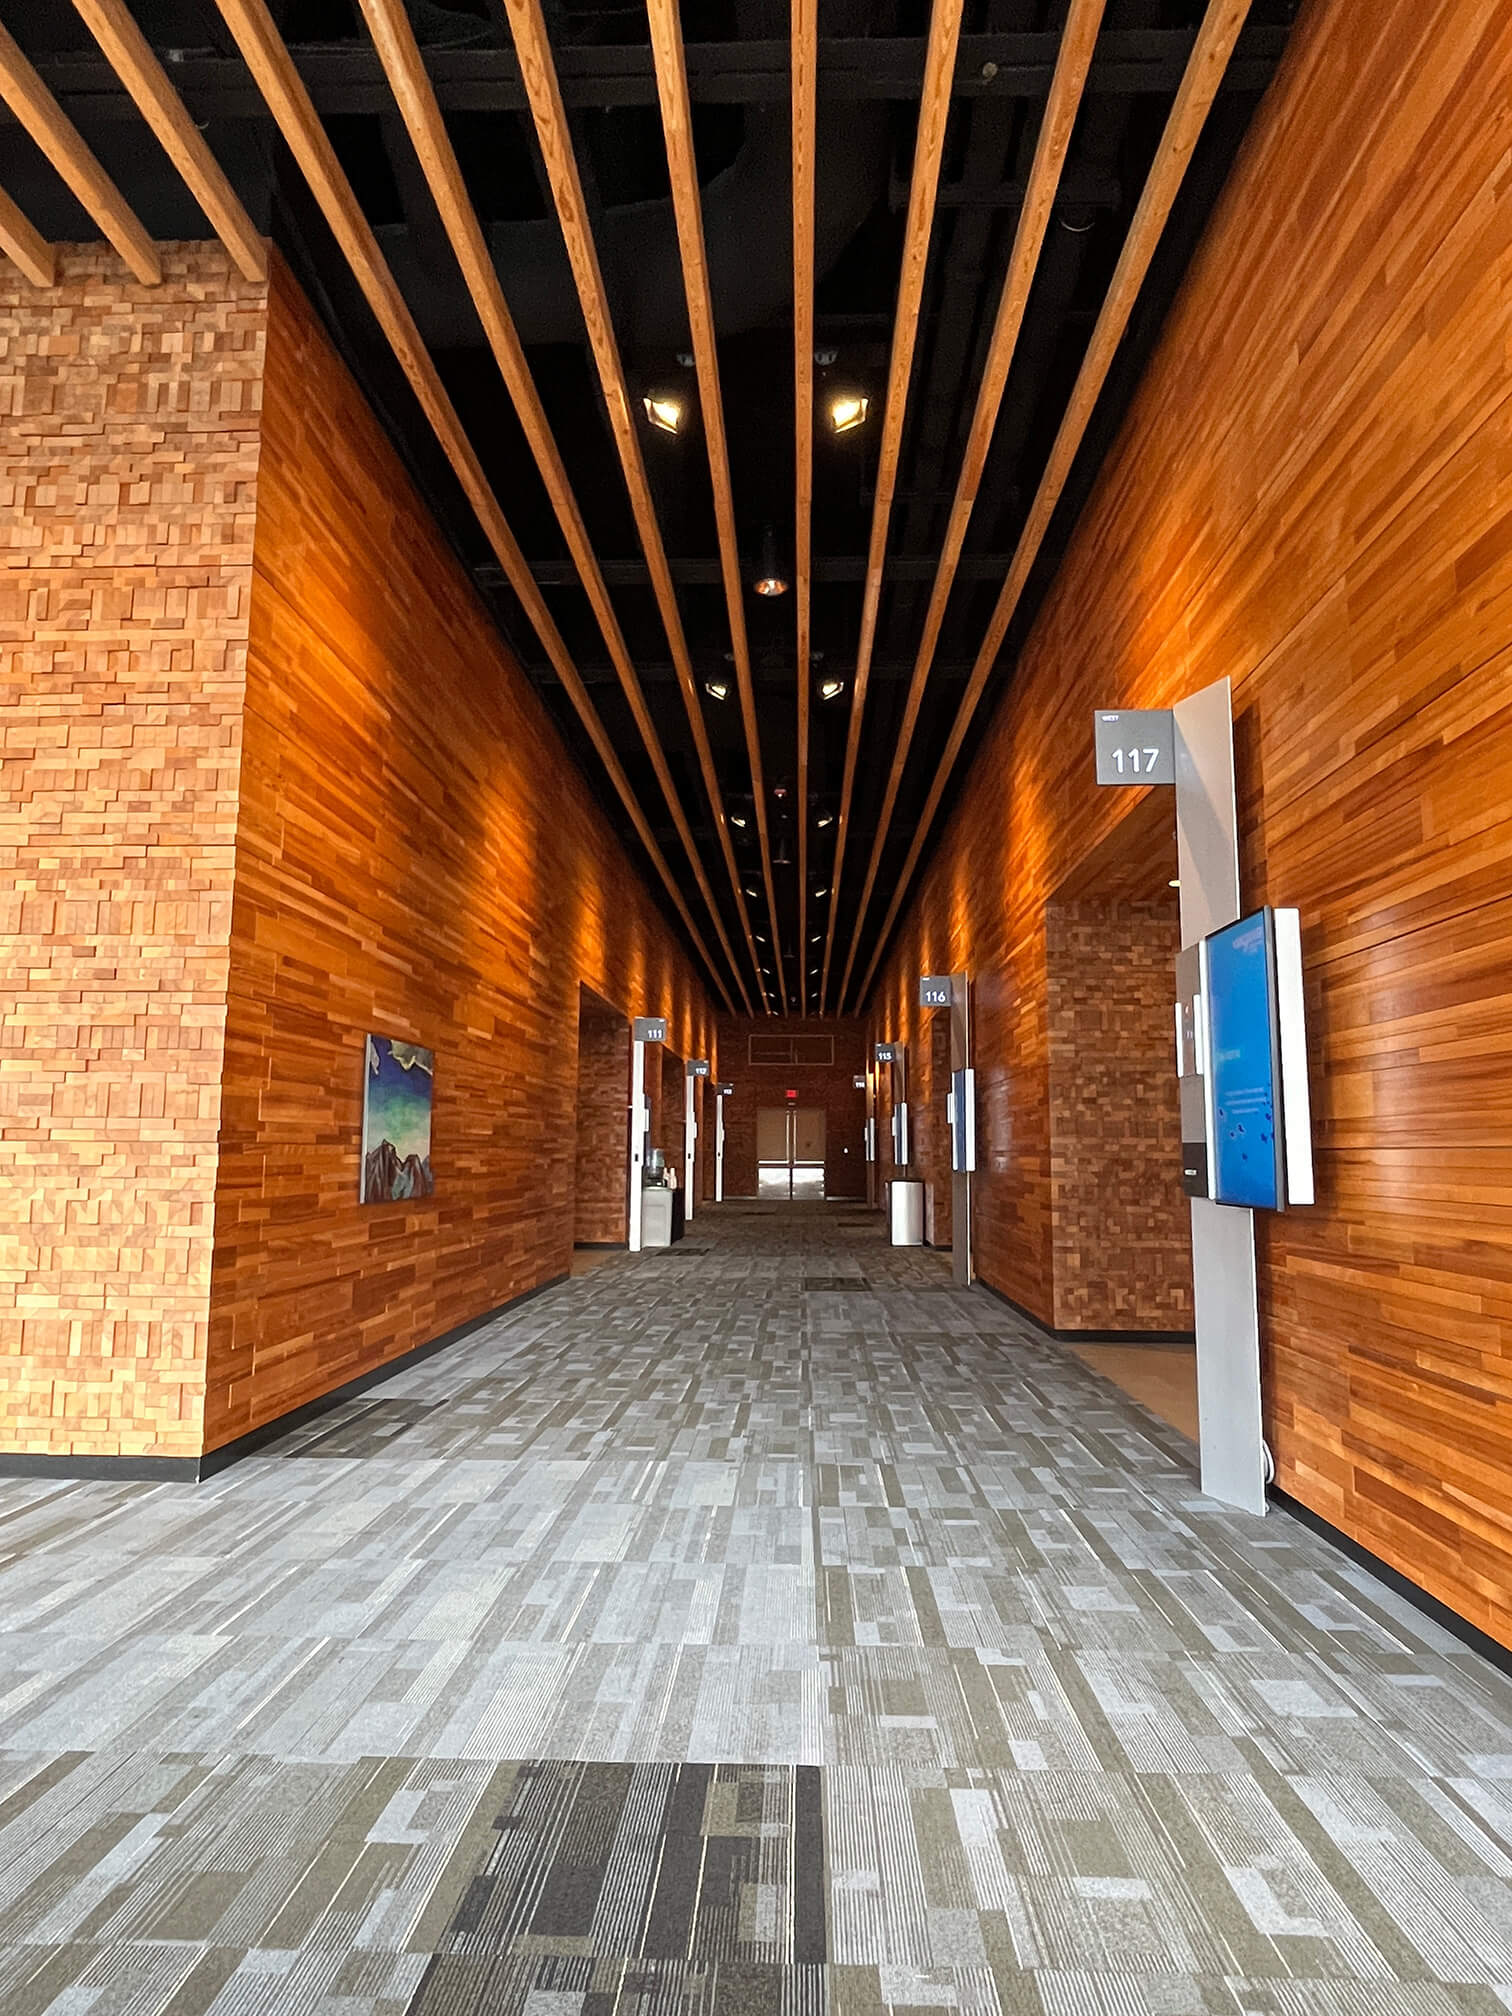 One of the inner hallways to conference rooms, which may be darker than the main corridors.